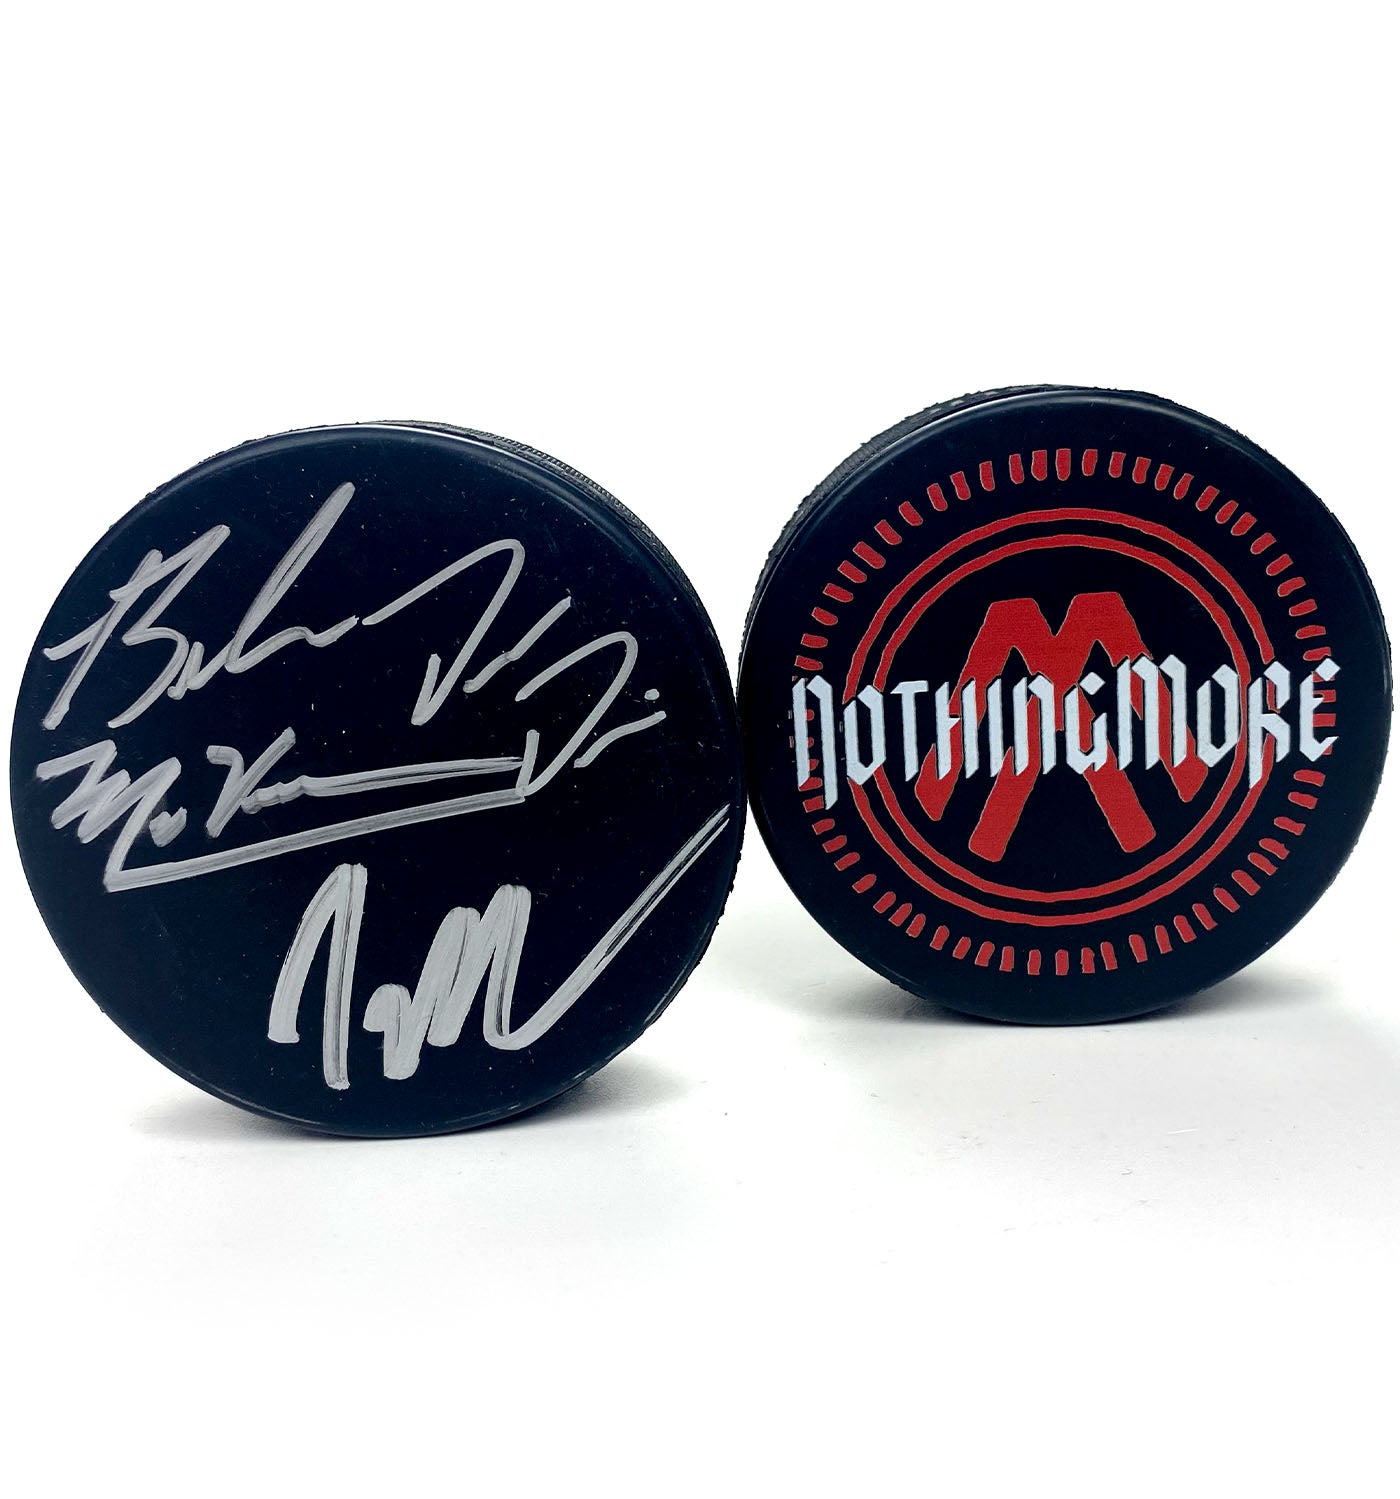 NOTHING MORE 'VALHALLA' limited edition autographed hockey puck